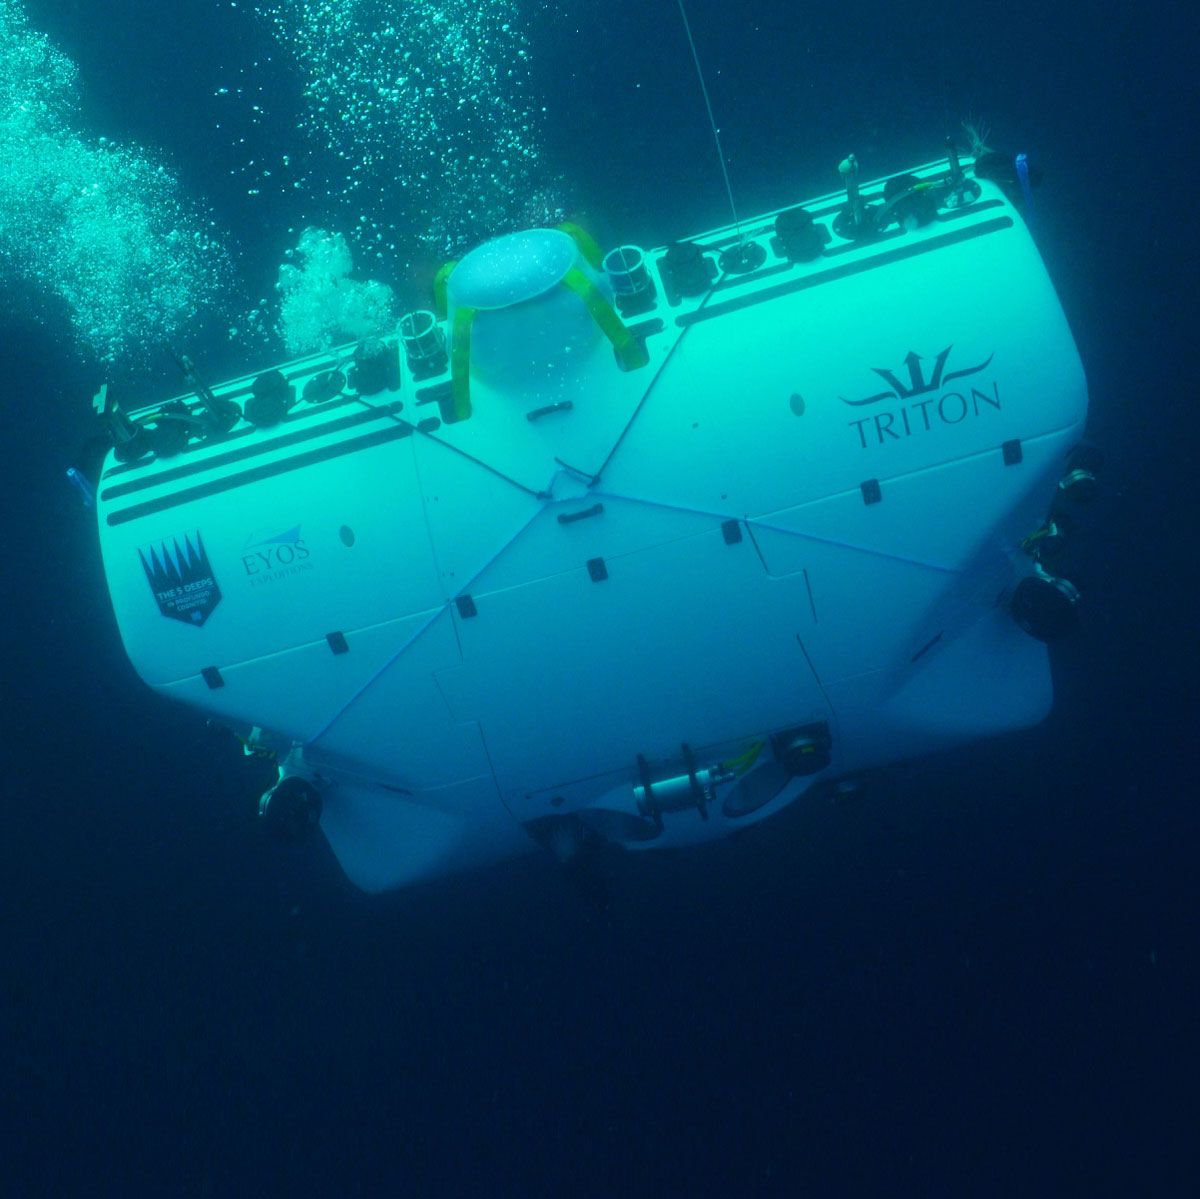 The ultimate submersible for sea exploration